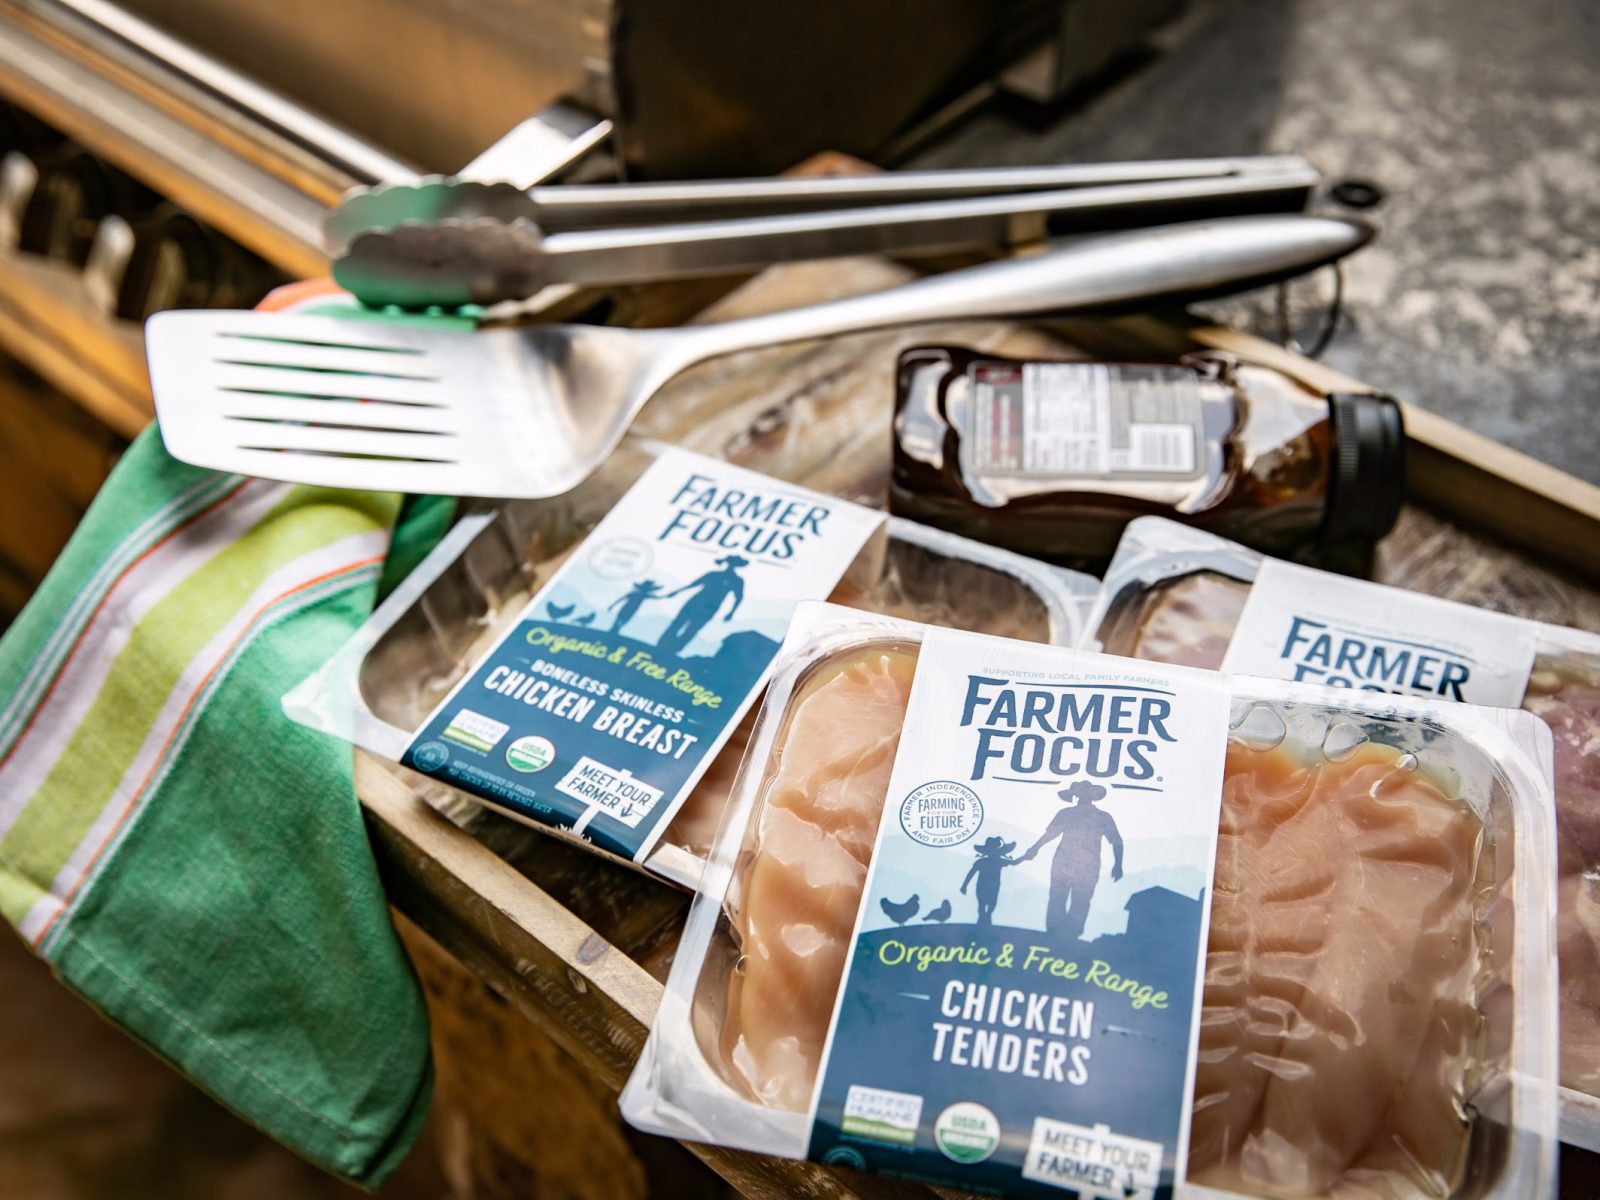 Save $2 Per Pound On Farmer Focus Chicken Breast And Tenders This Week At Publix – Time To Stock The Freezer!